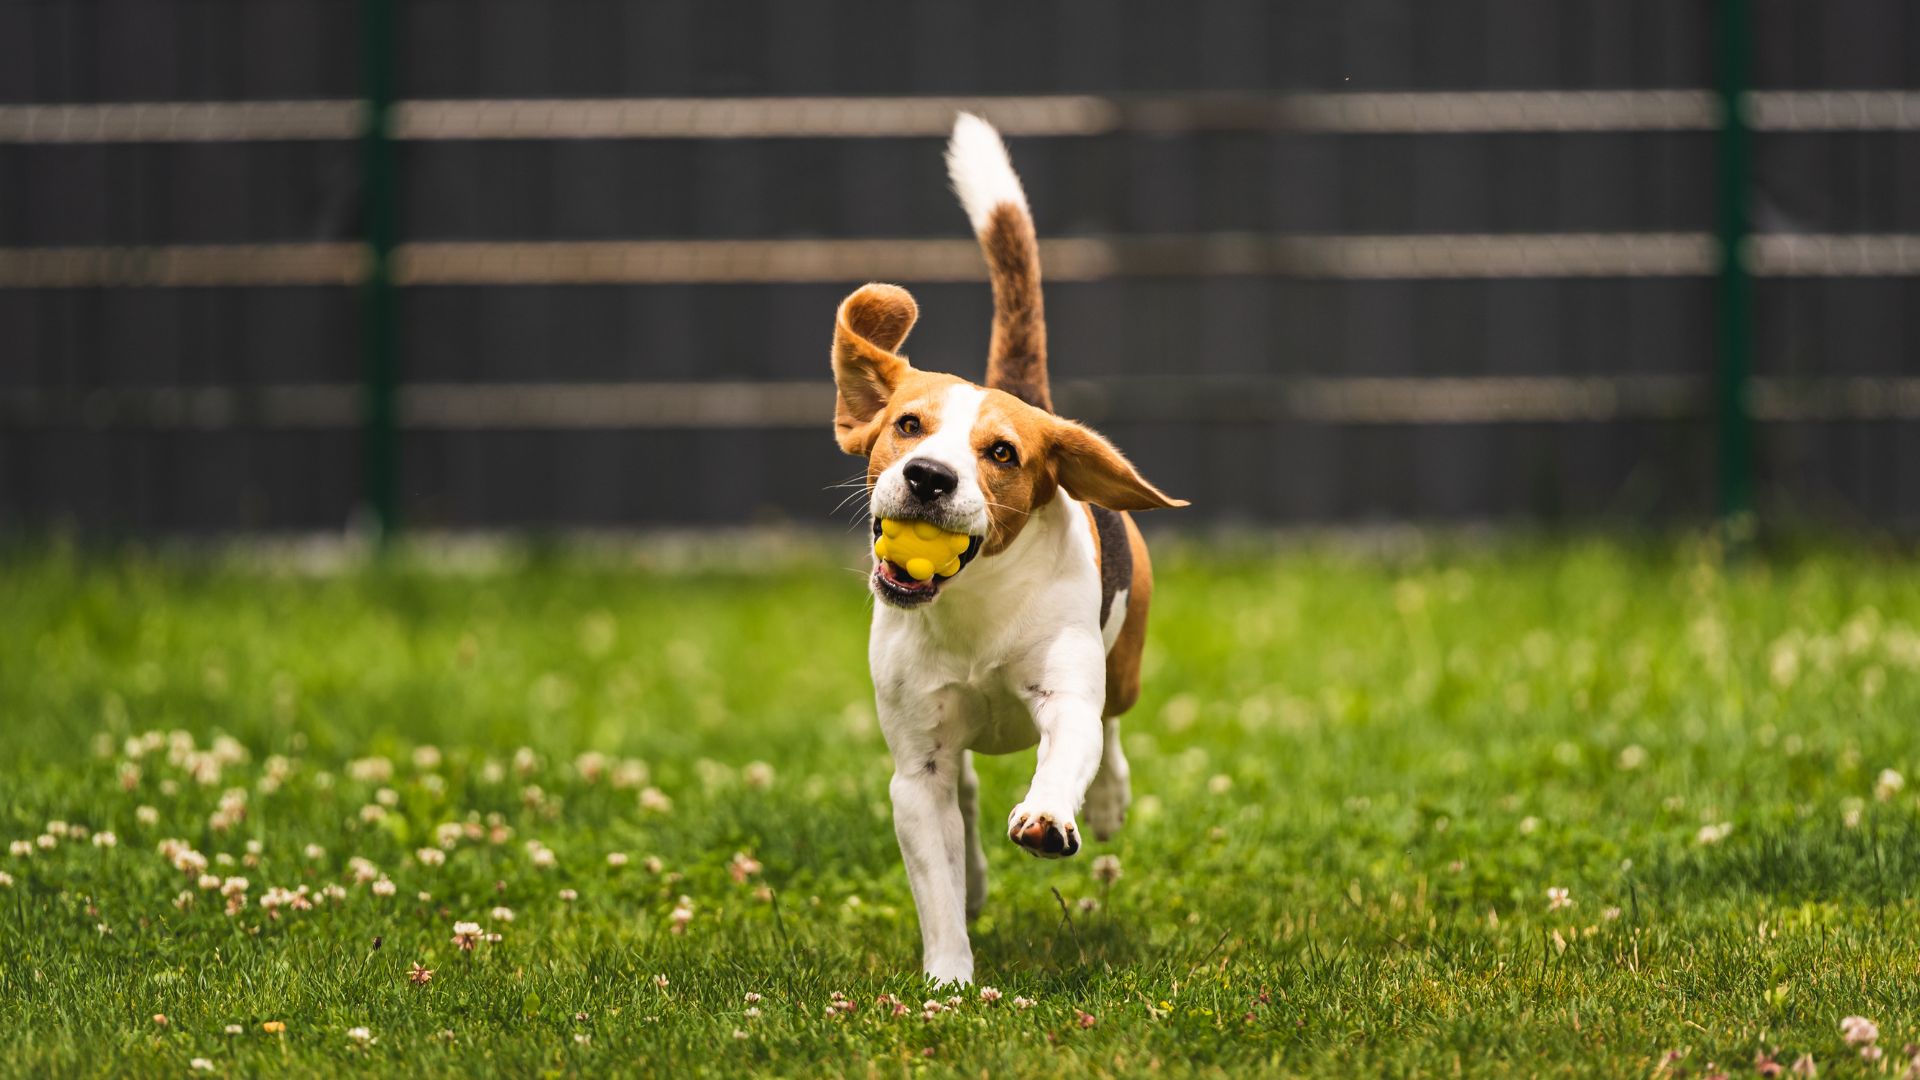 A dog running with a yellow ball in its mouth